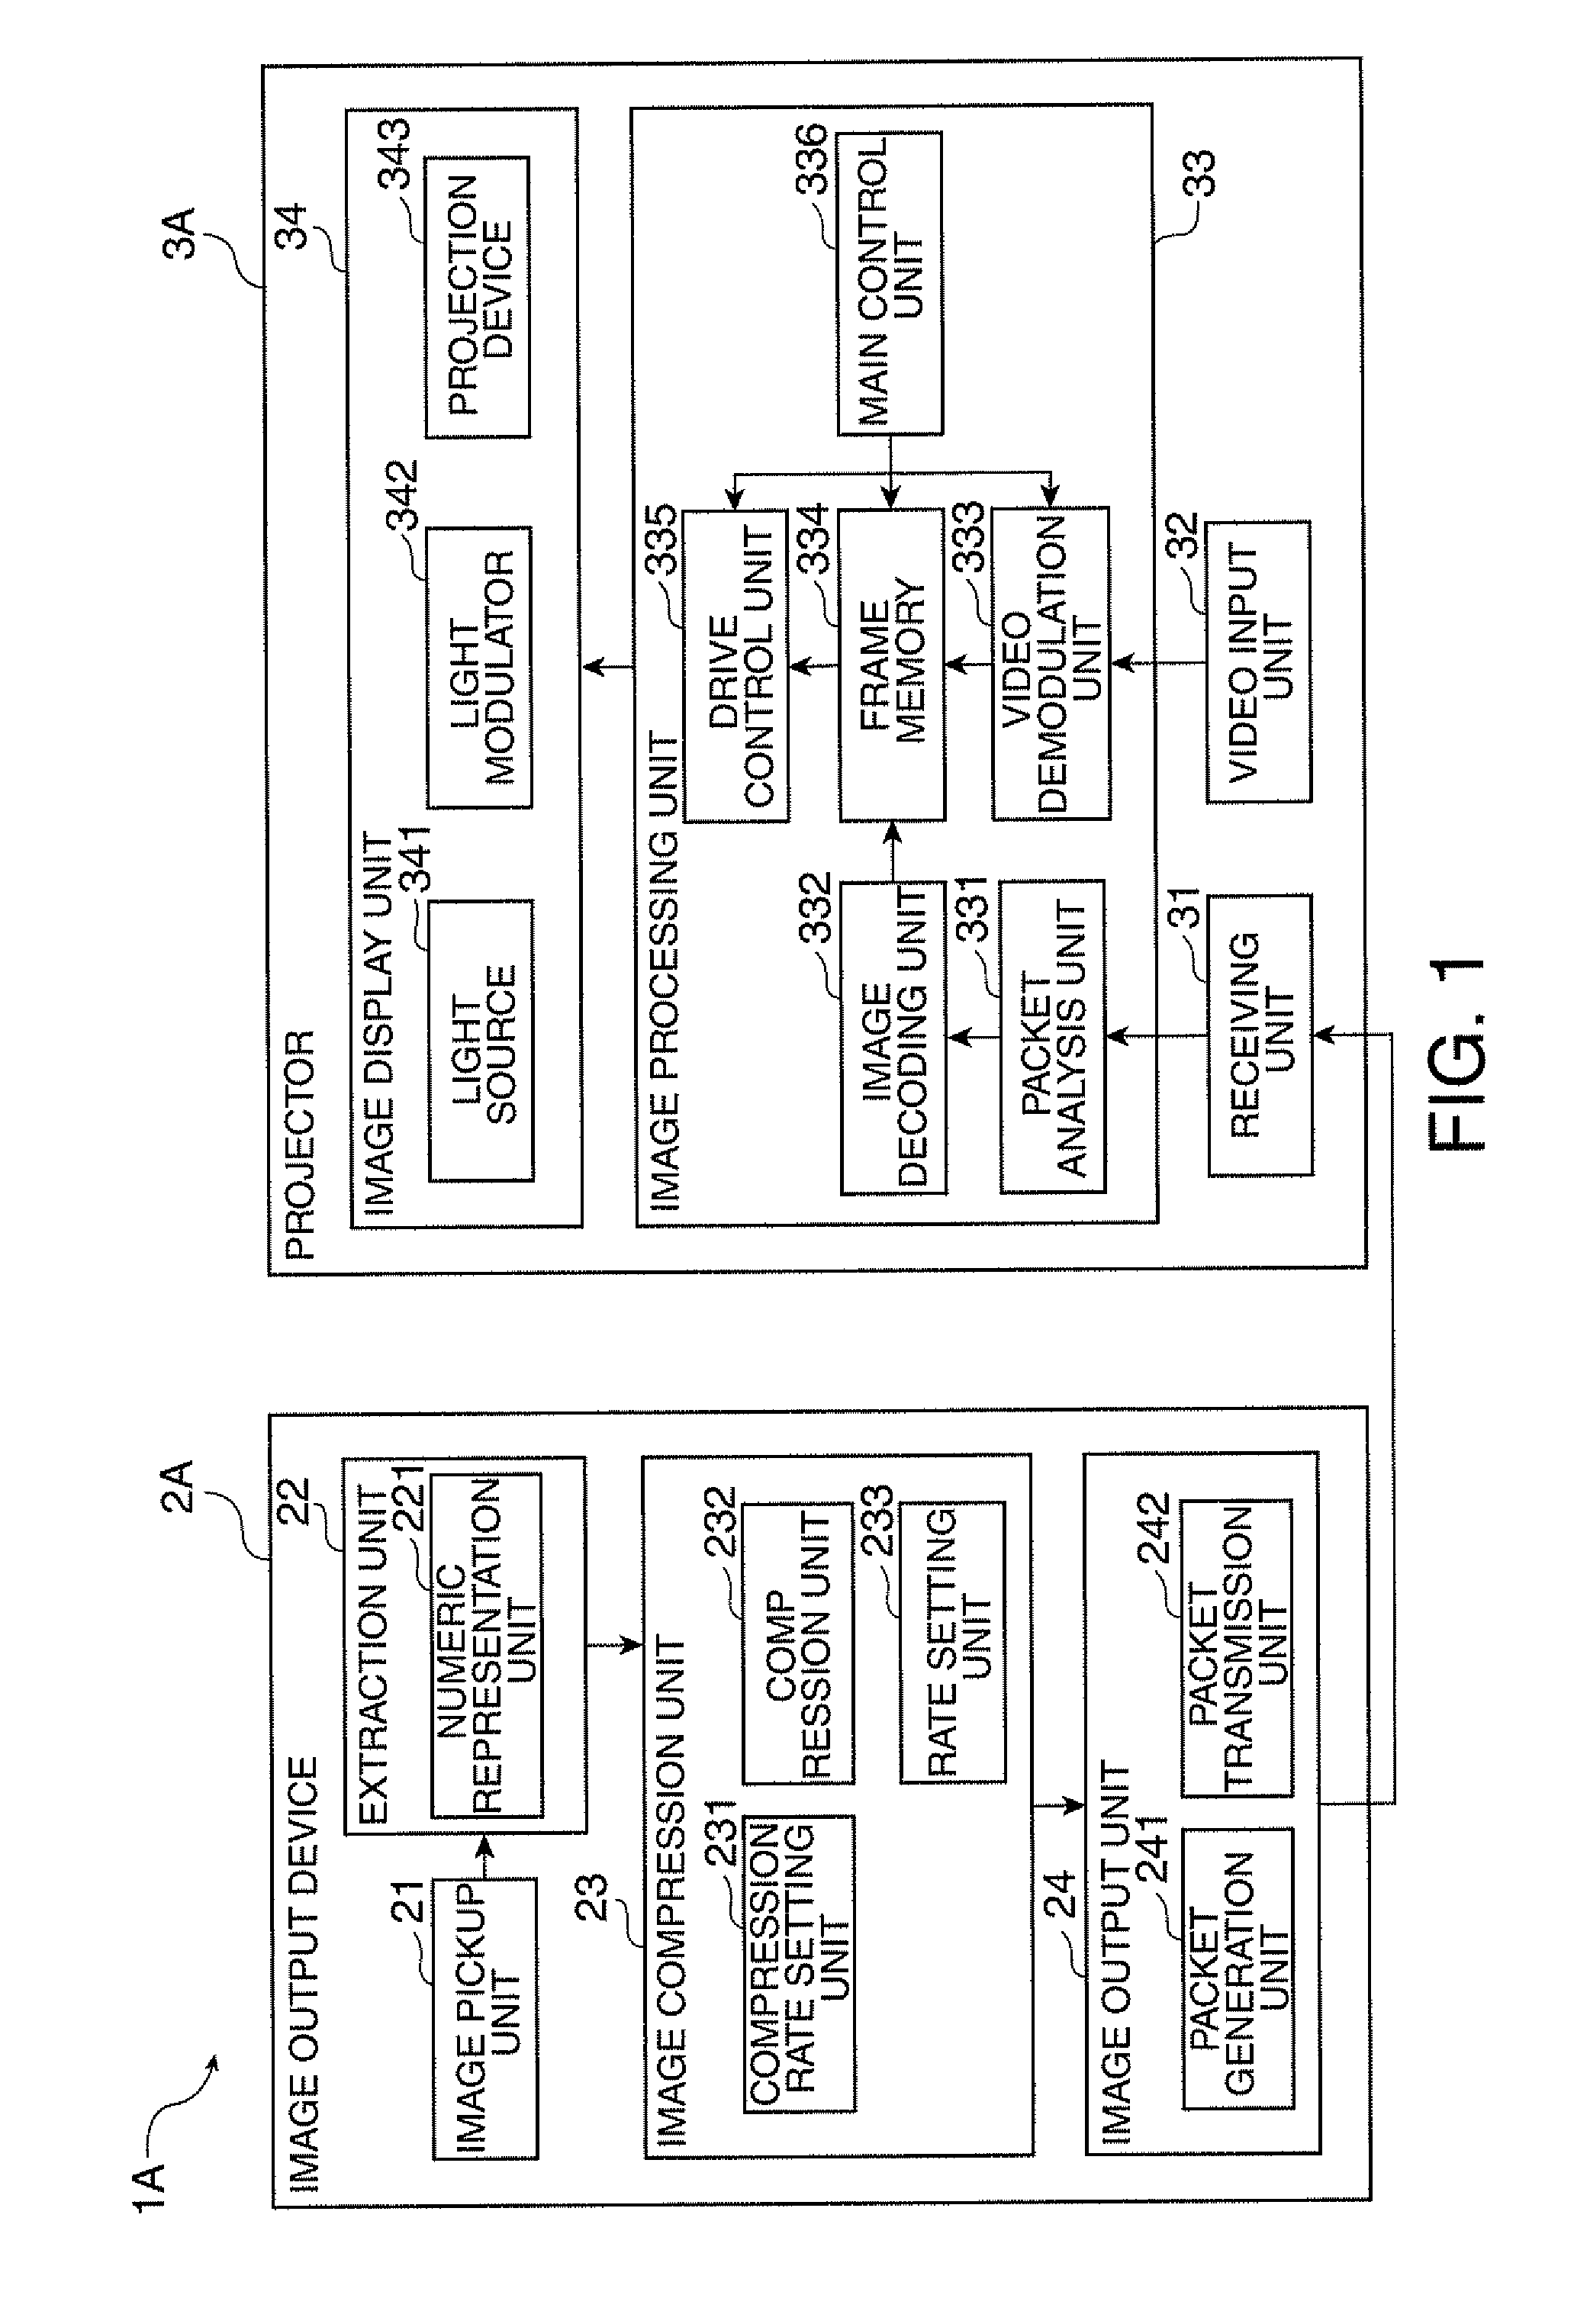 Display system, image output device and image display device